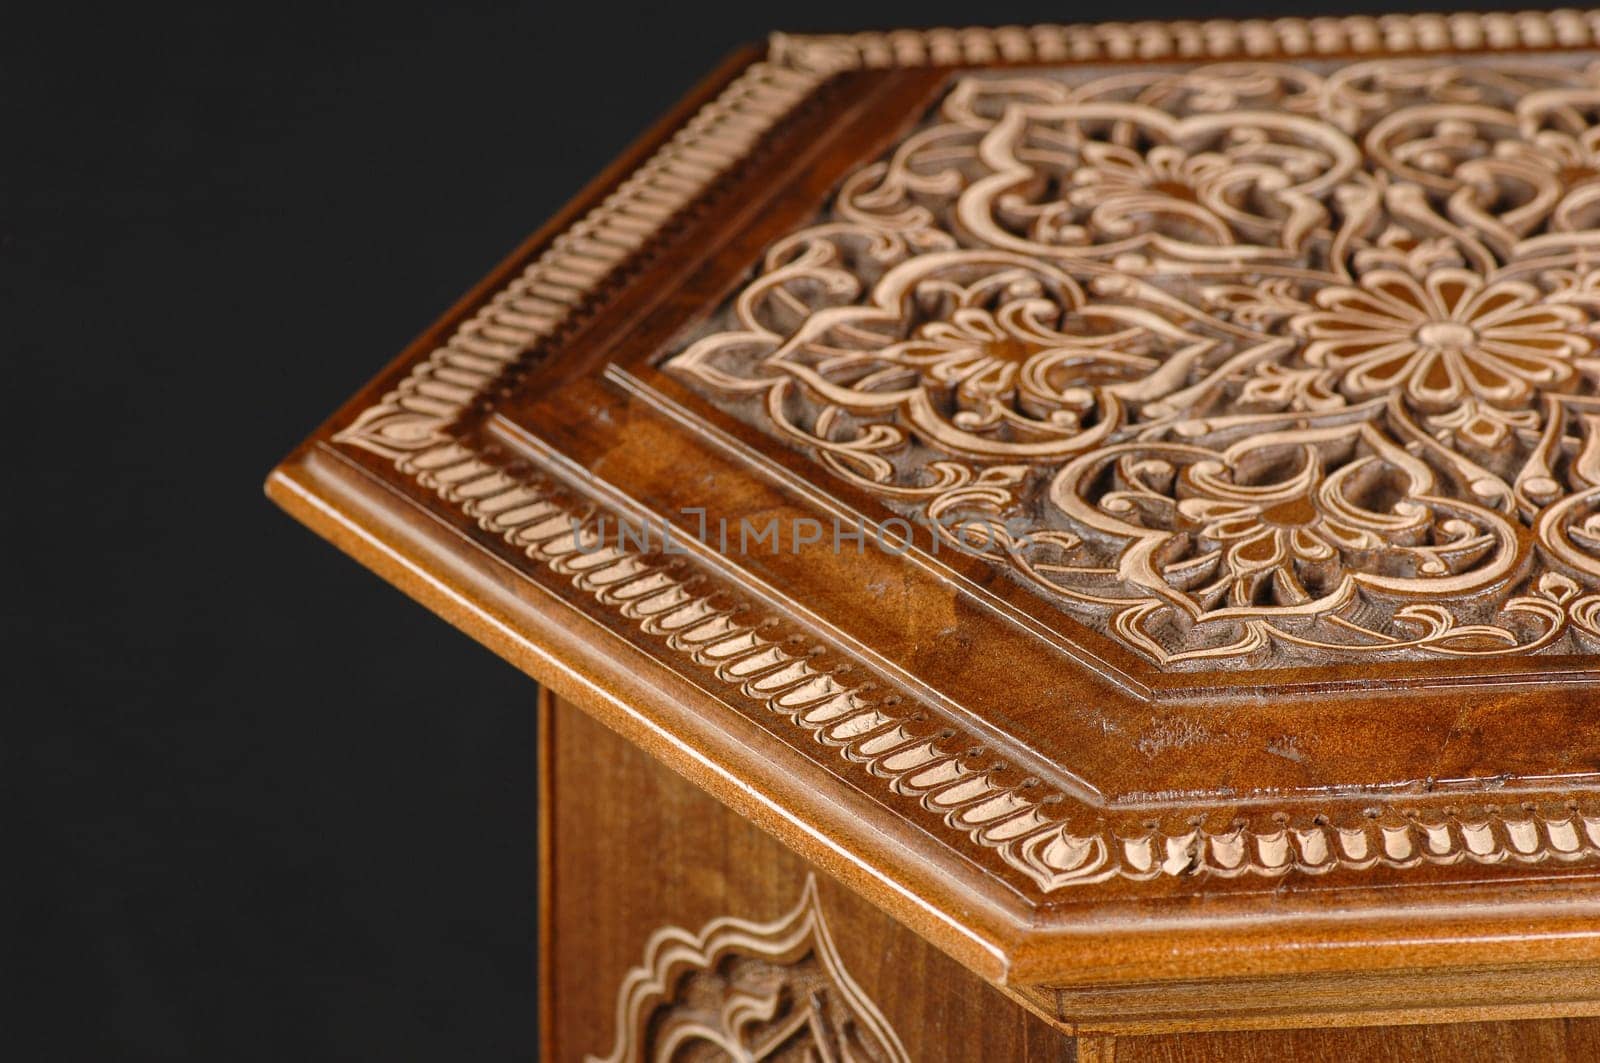 The close-up vintage oriental wooden table with the artistic carving on a black background, Uzbekistan